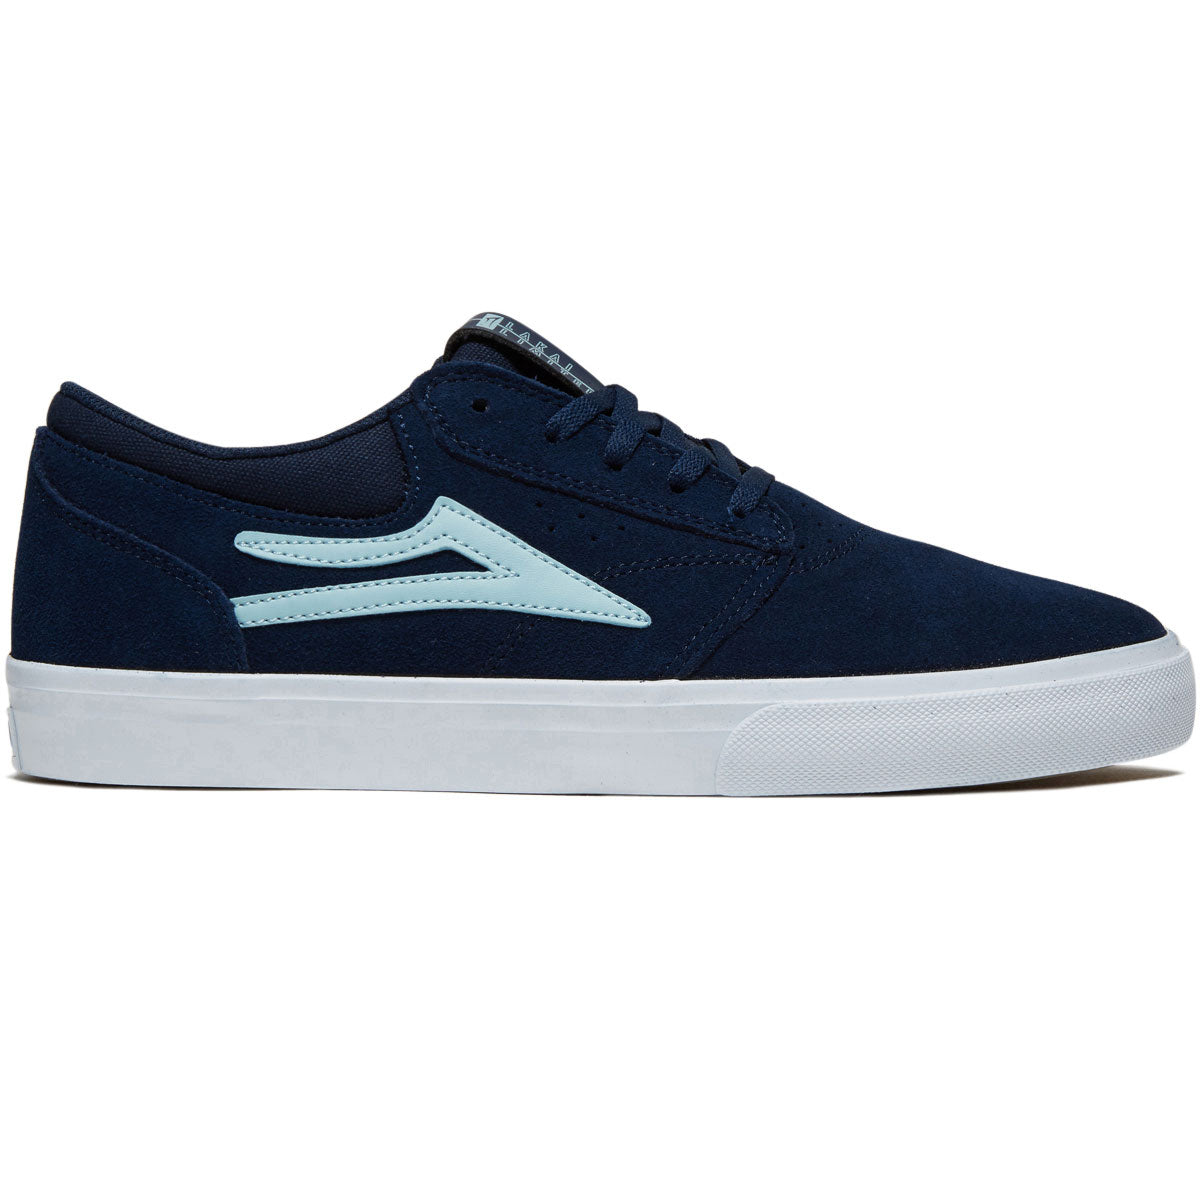 Lakai Griffin Shoes - Suede Navy image 1